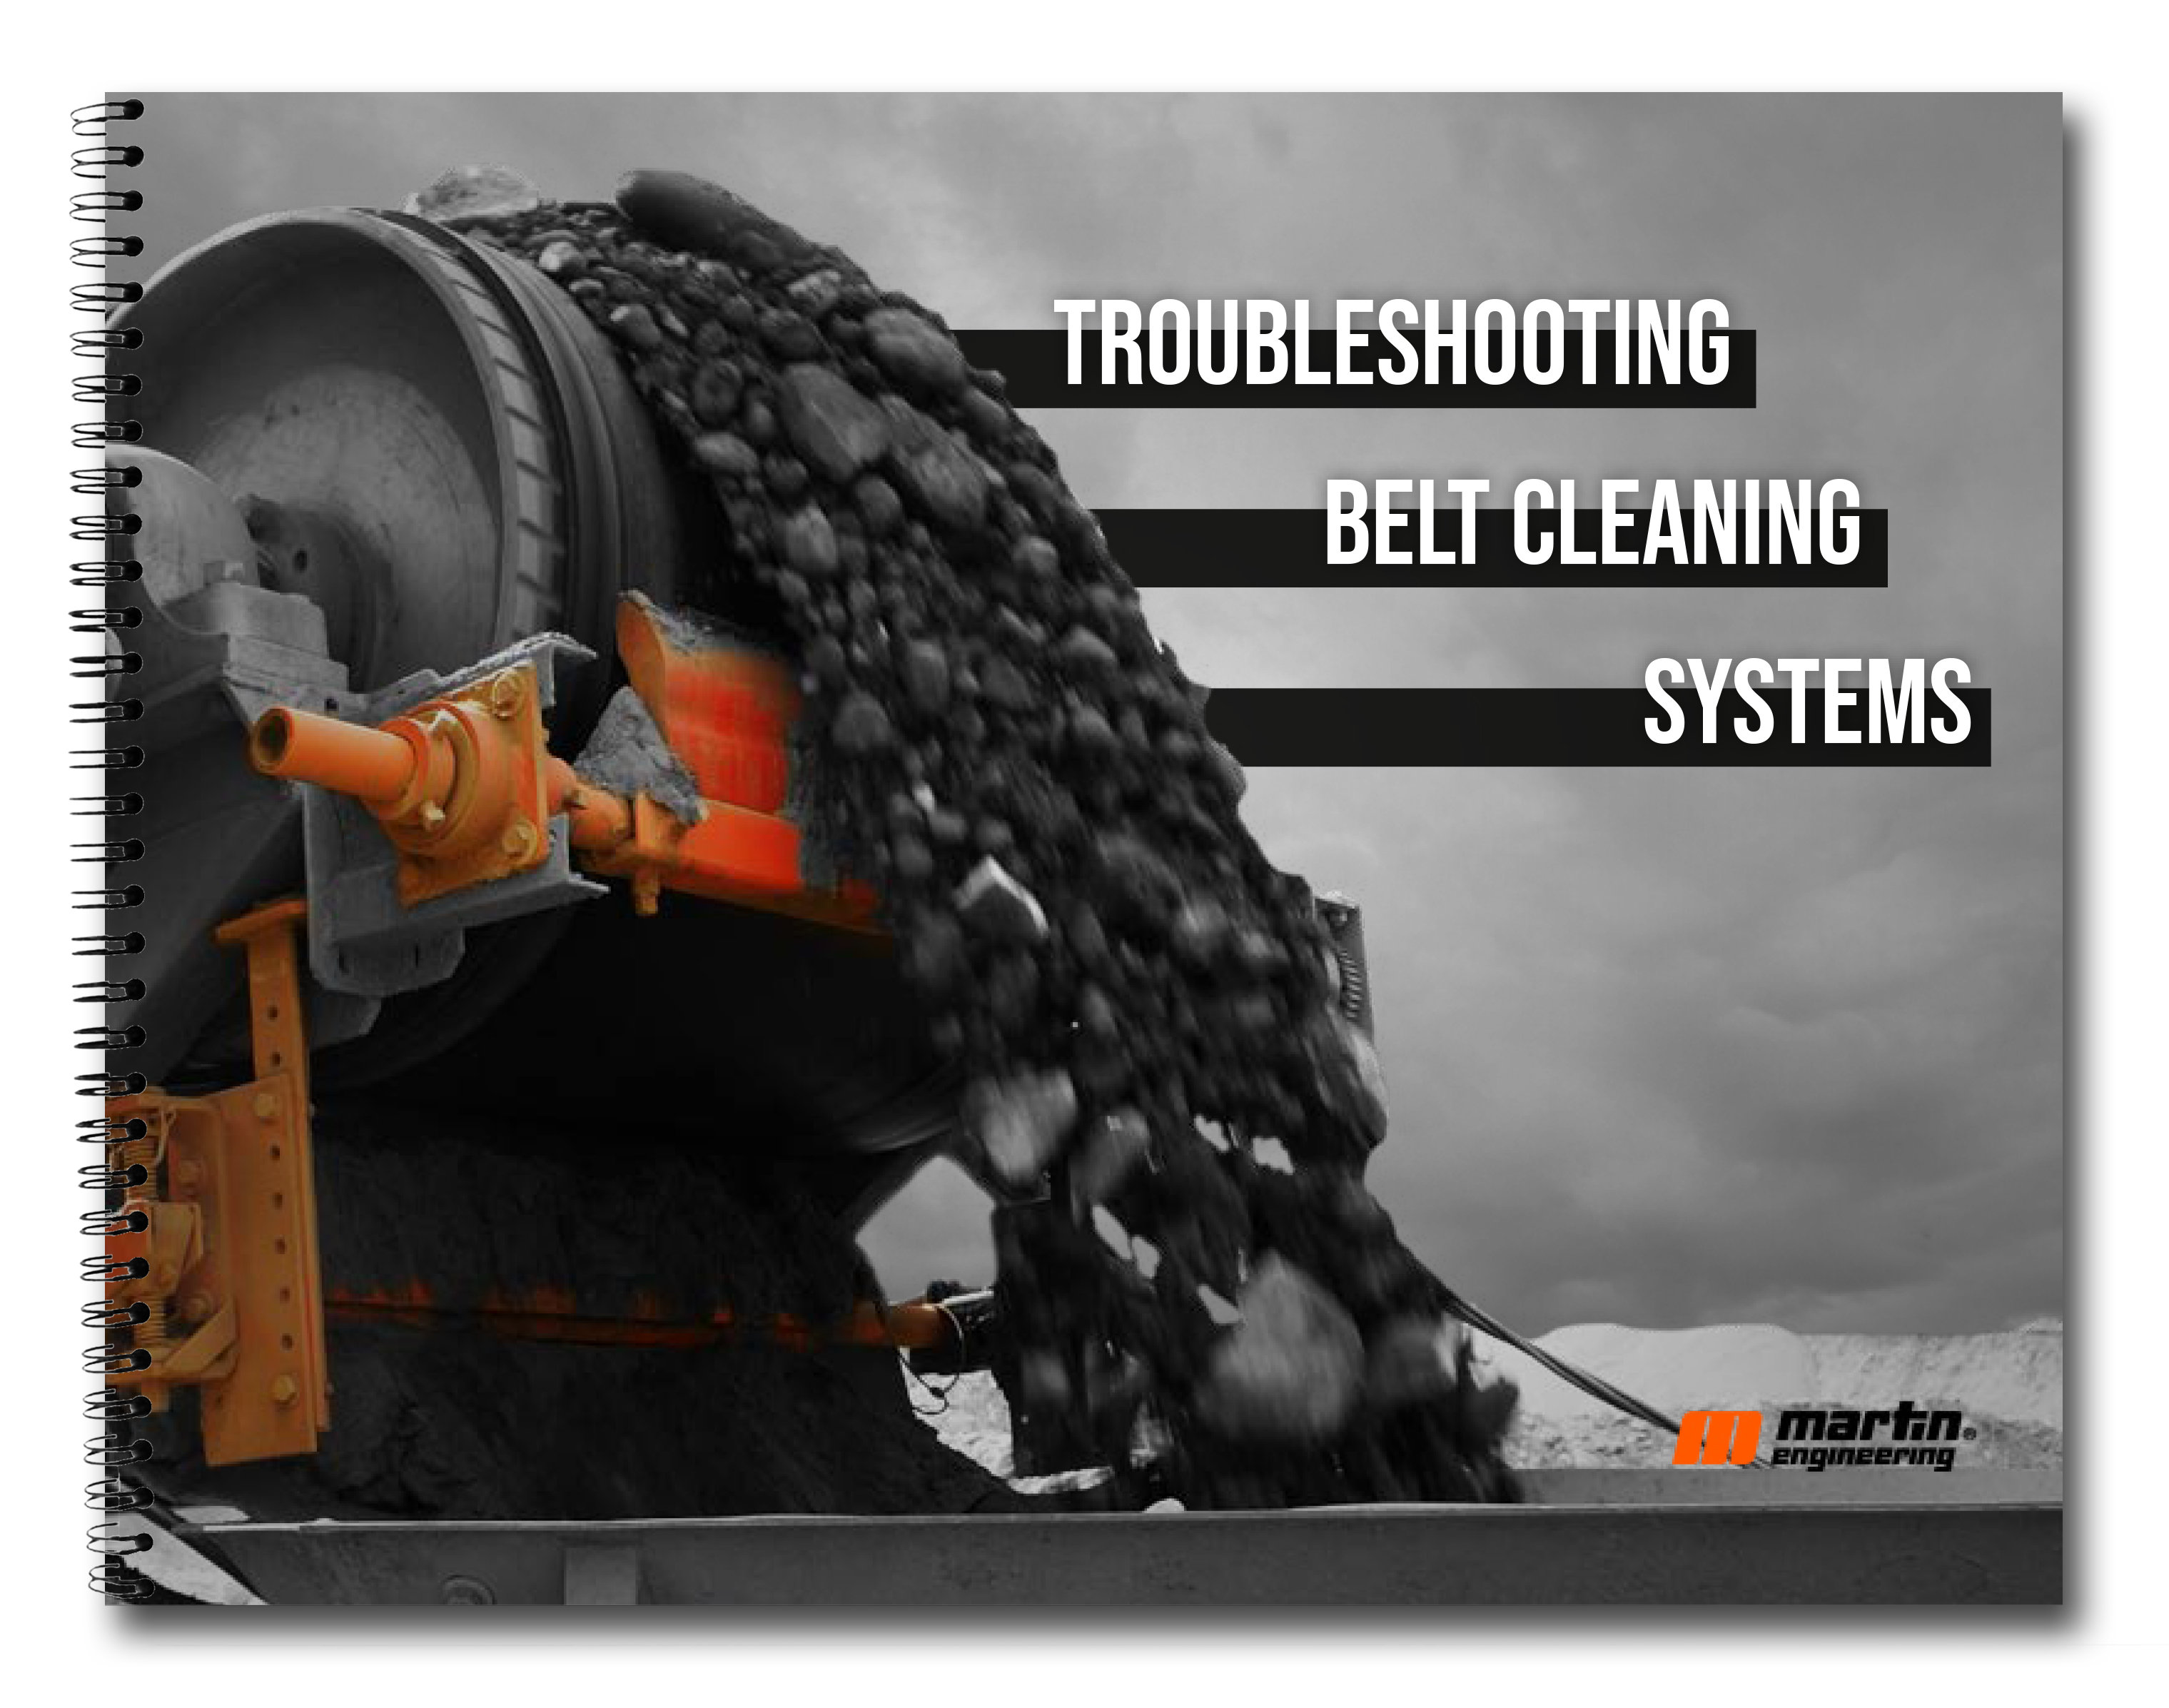 Troubleshooting Belt Cleaning Systems, Cover, Image, Spiral, EBook